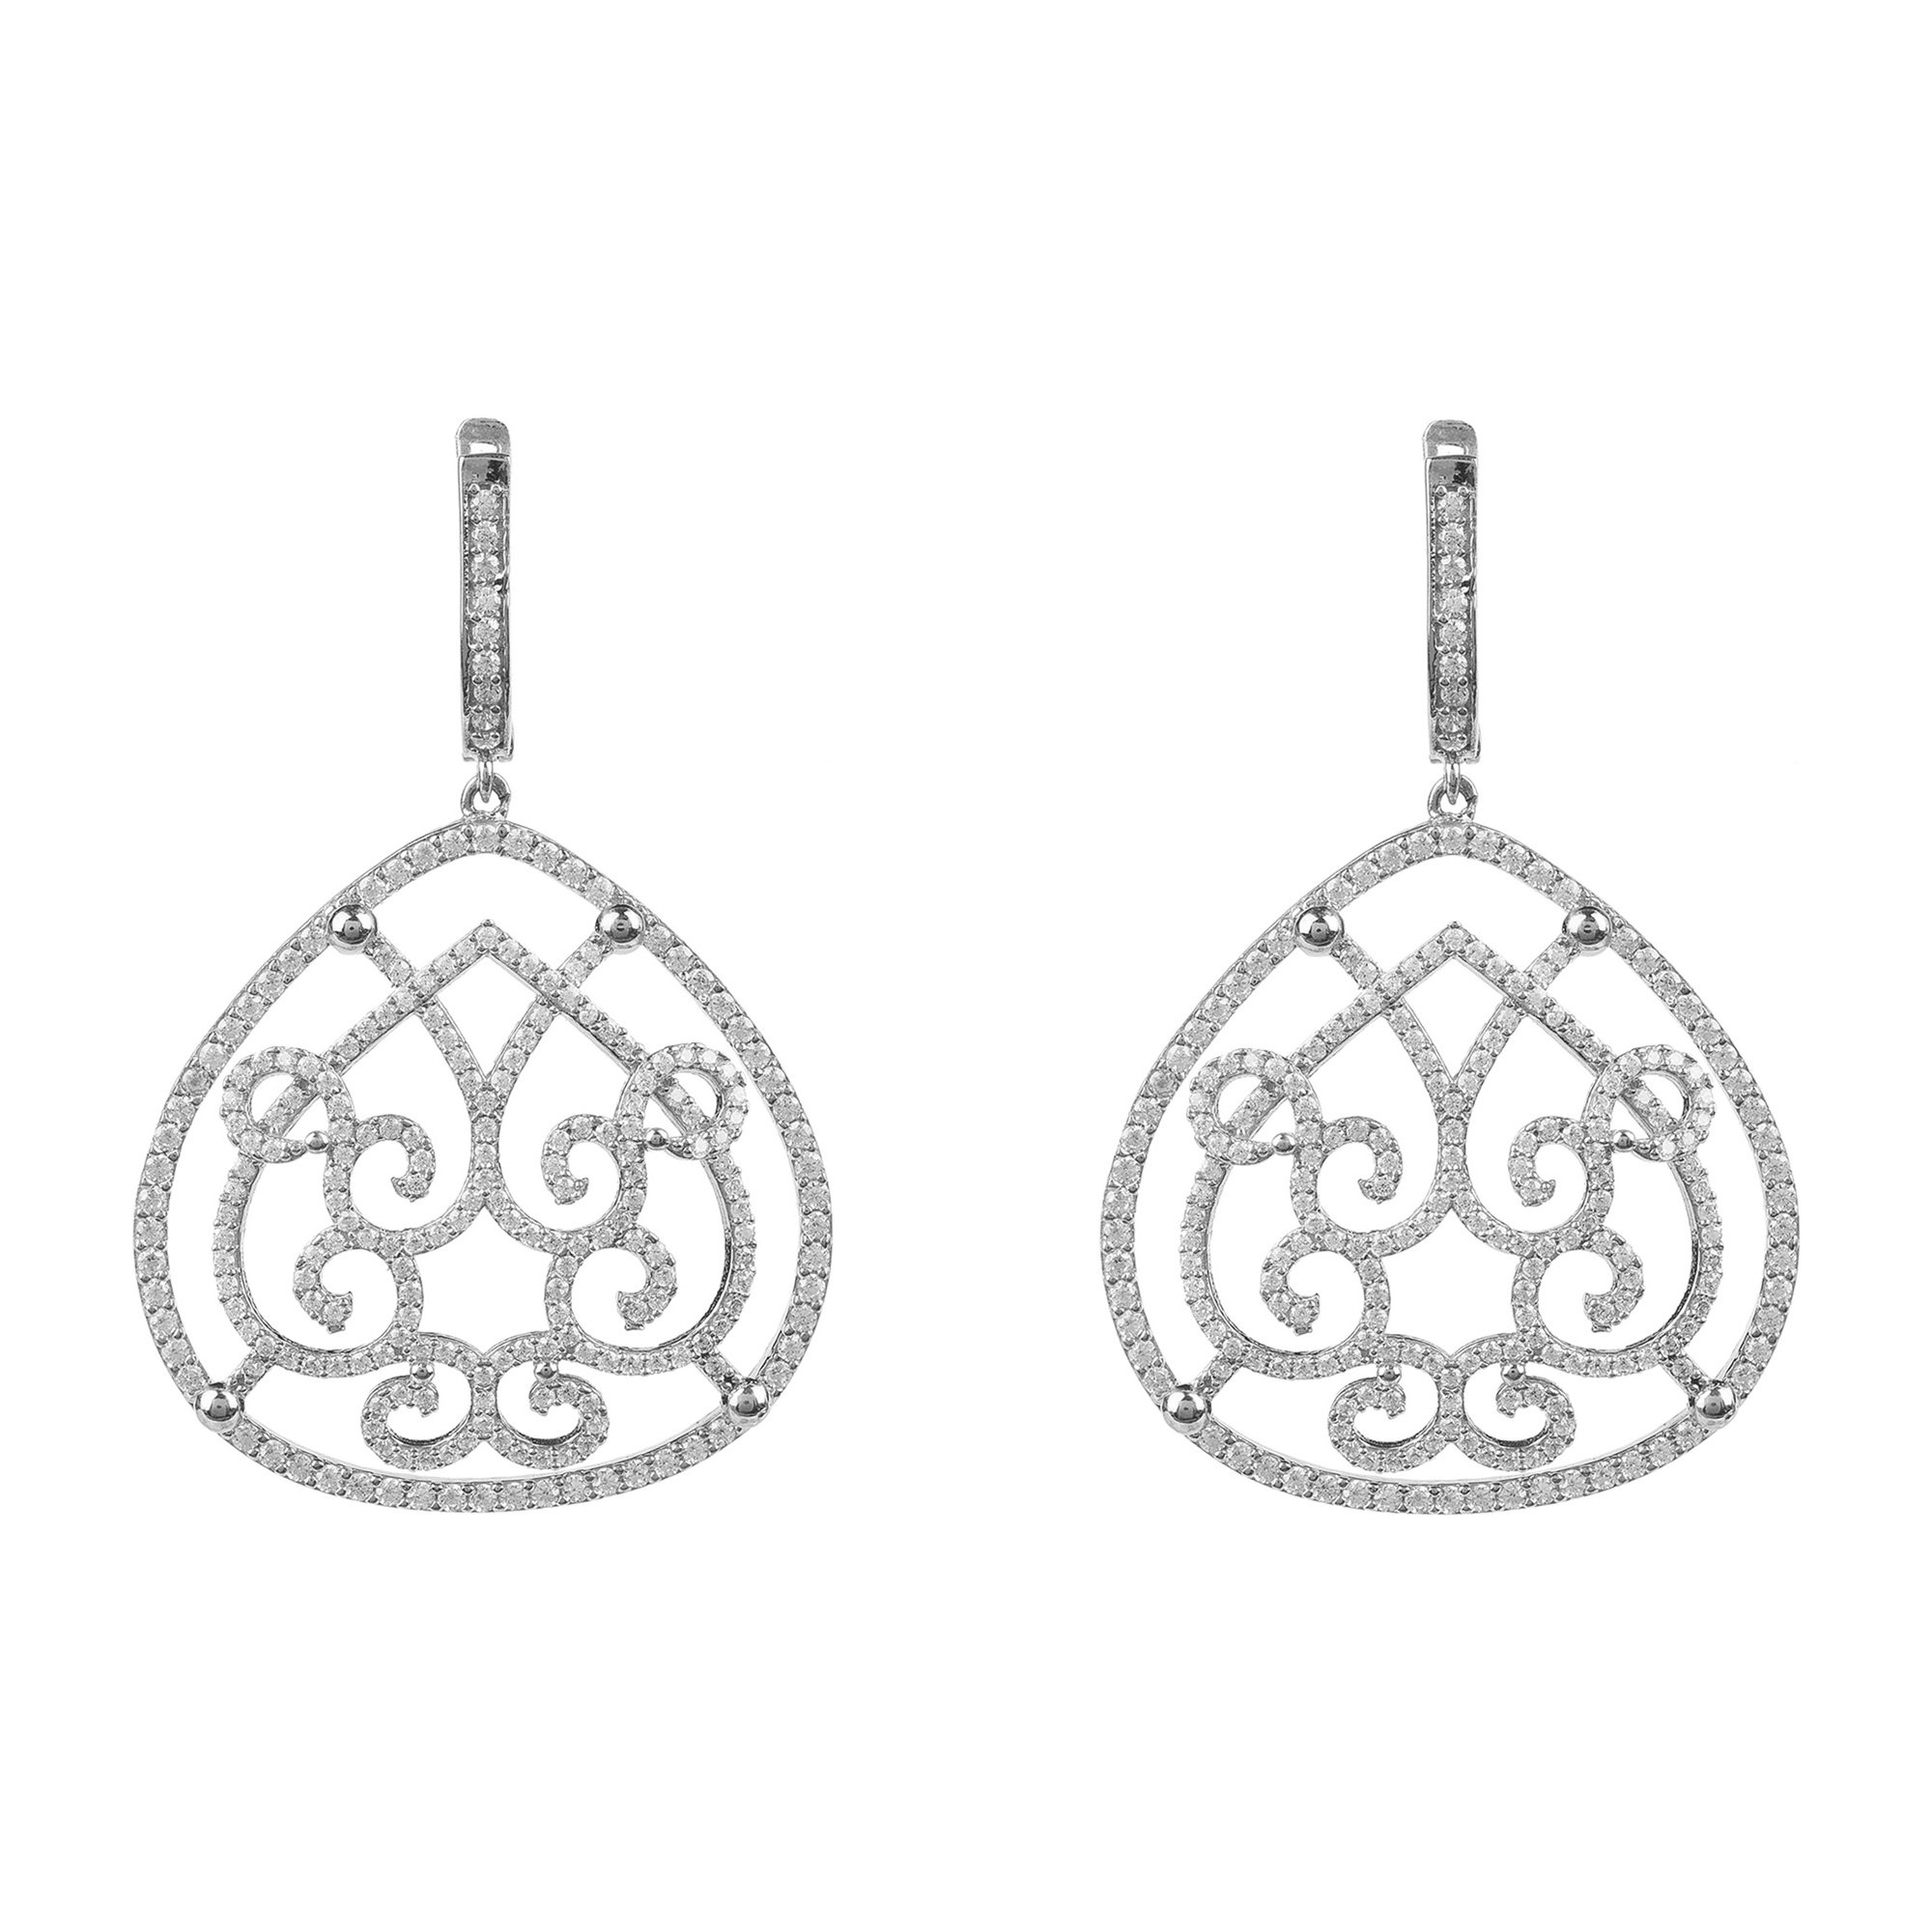 Maria Sterling Silver Statement Earrings